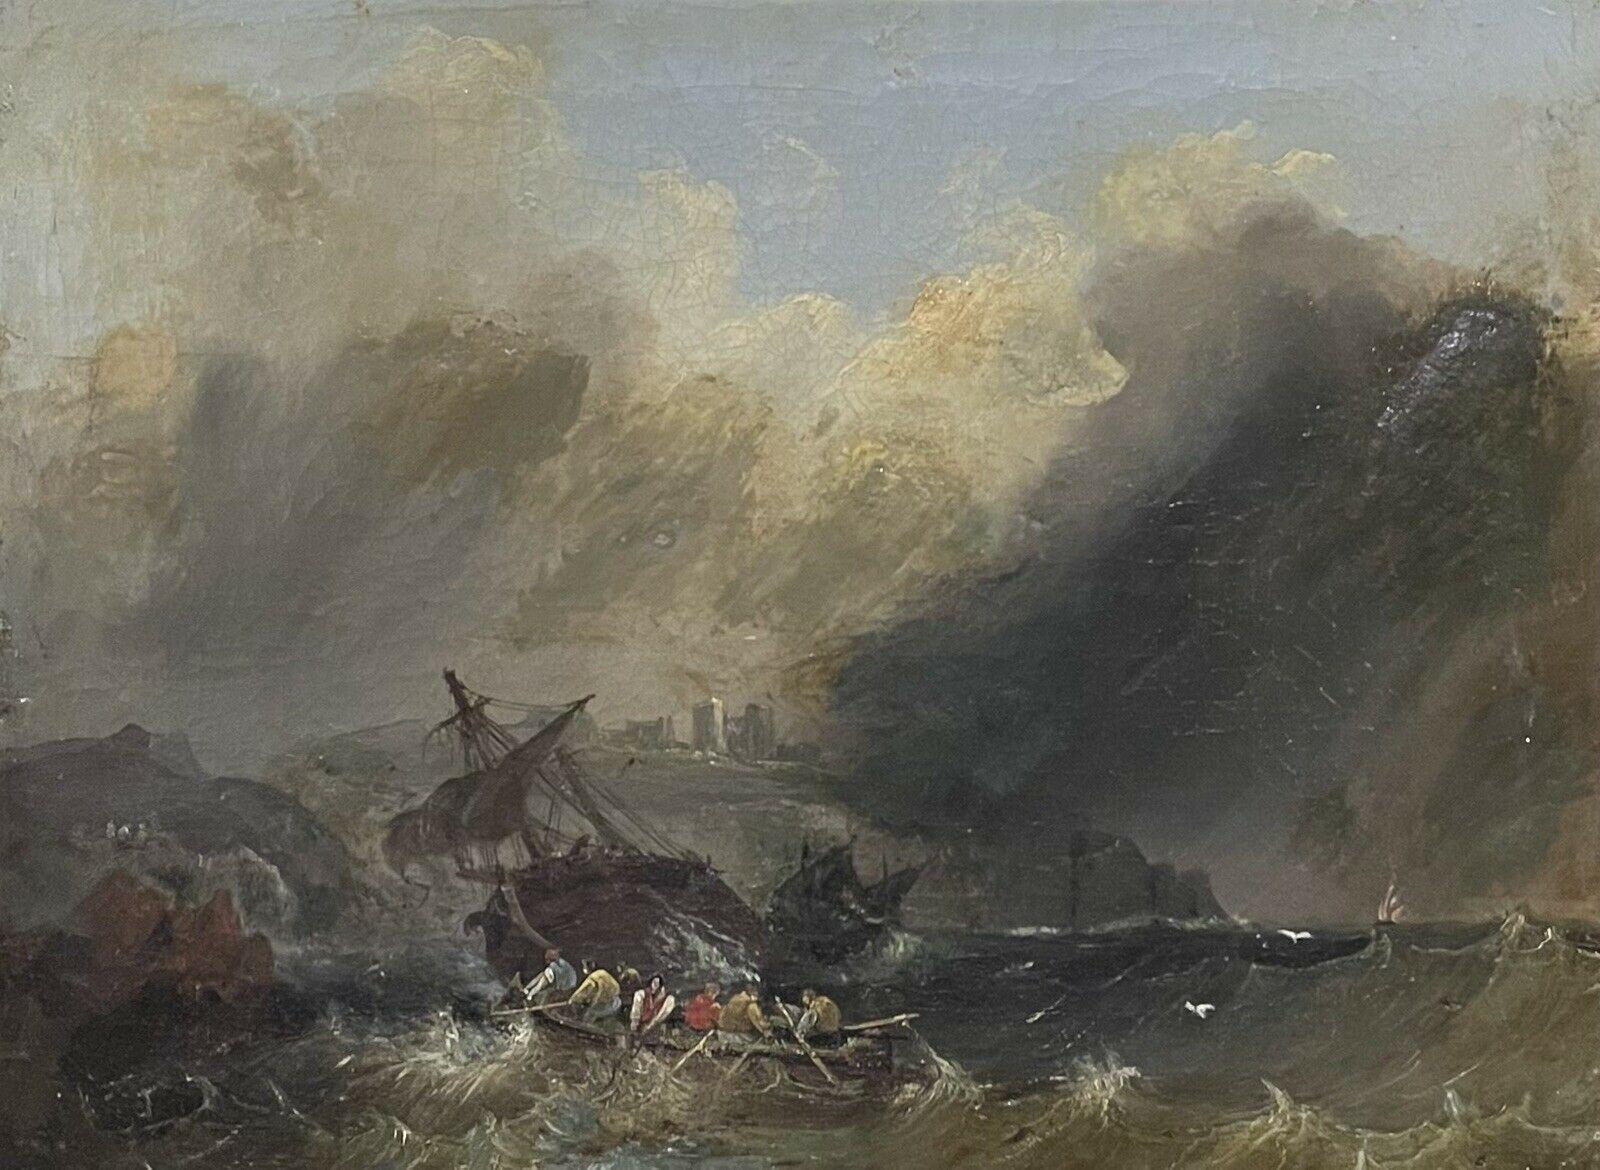 British Victorian Landscape Painting - Antique British Marine Oil Painting Sailors in a Shipwreck Storm off the Coast